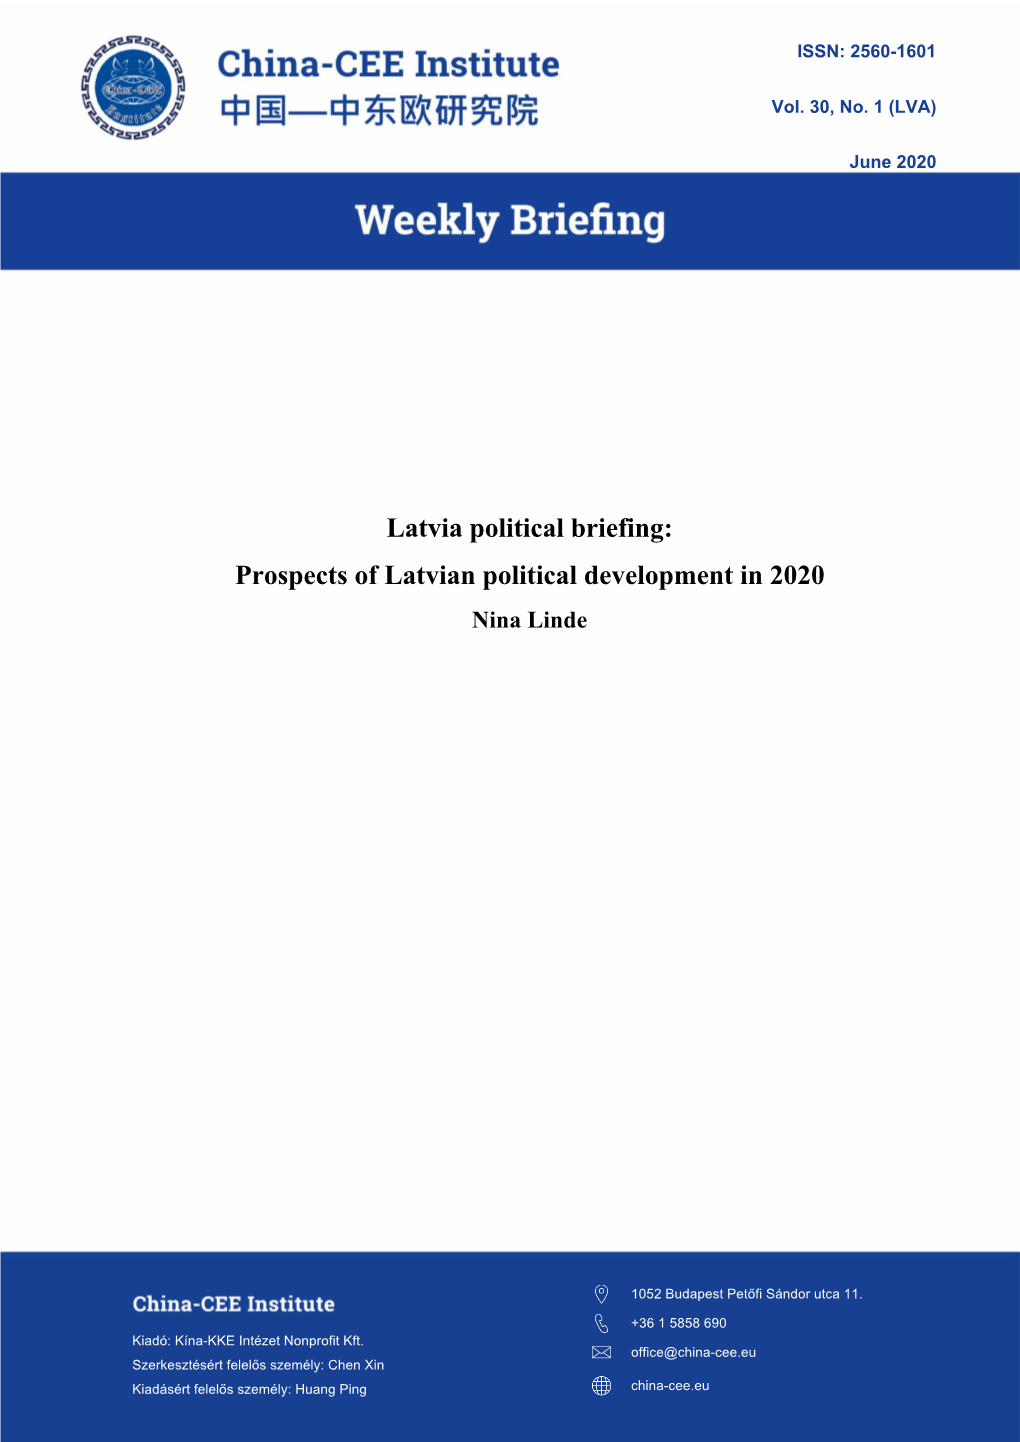 Latvia Political Briefing: Prospects of Latvian Political Development in 2020 Nina Linde